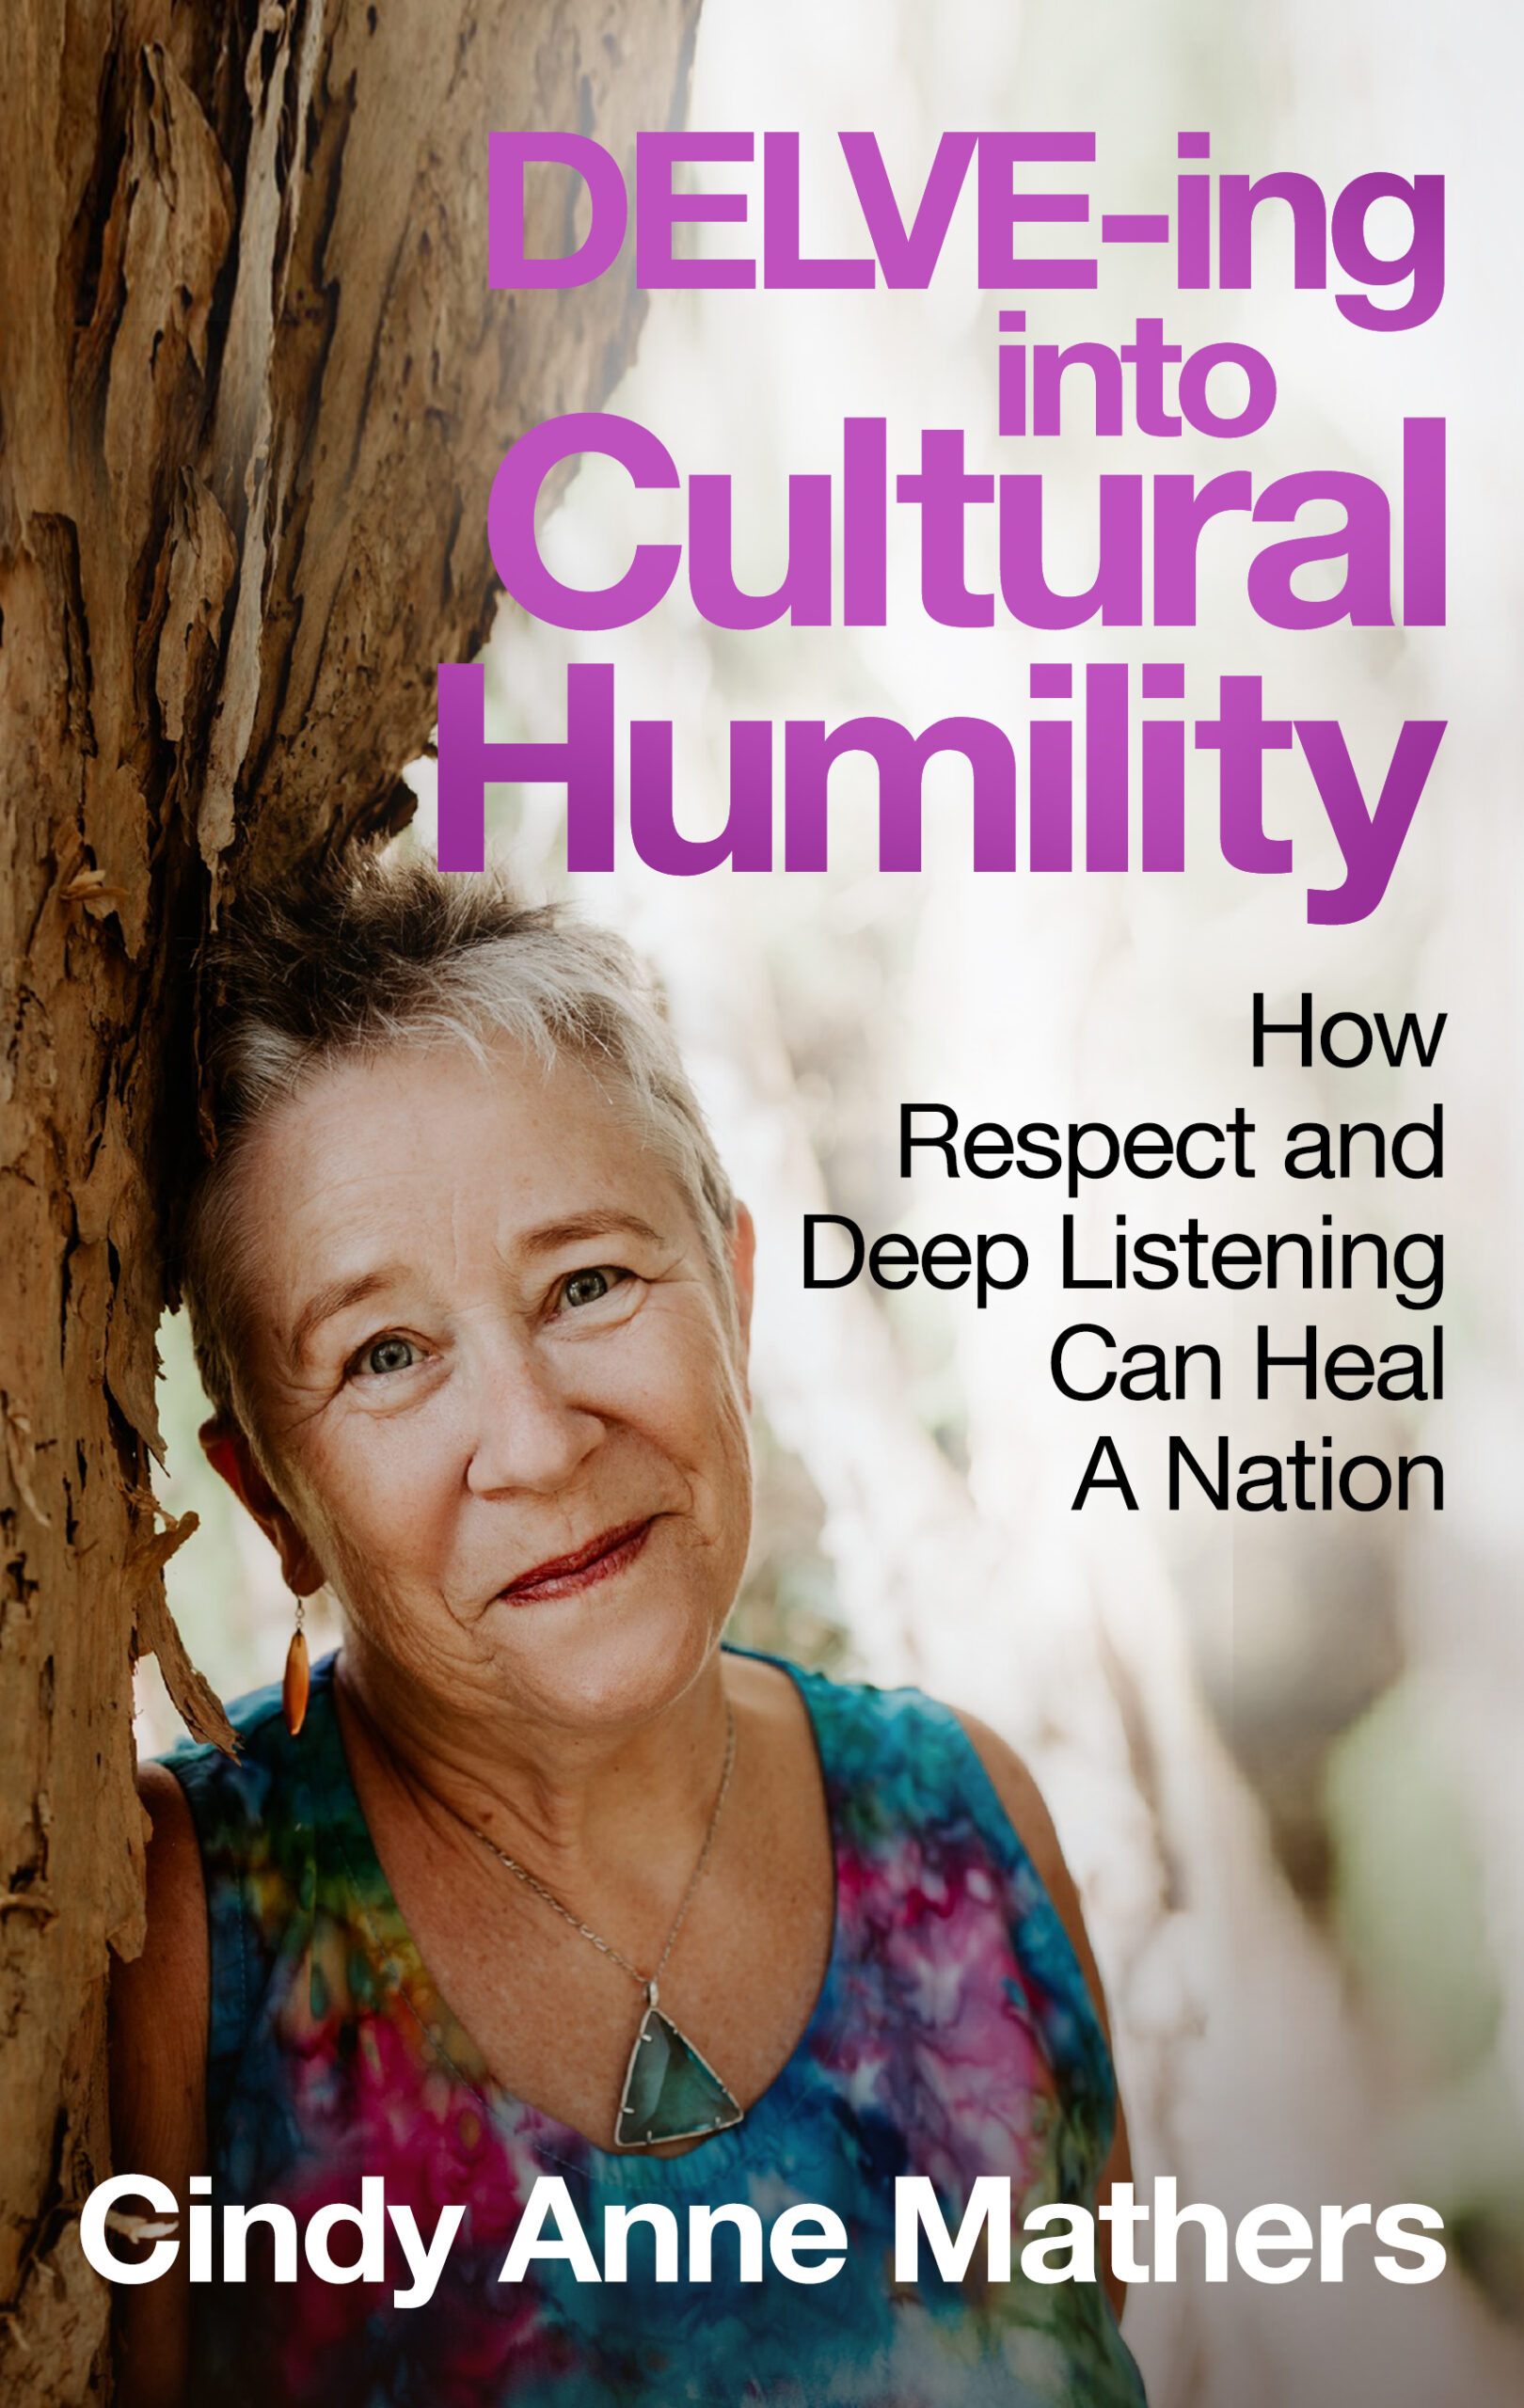 “DELVE-ing into Cultural Humility”